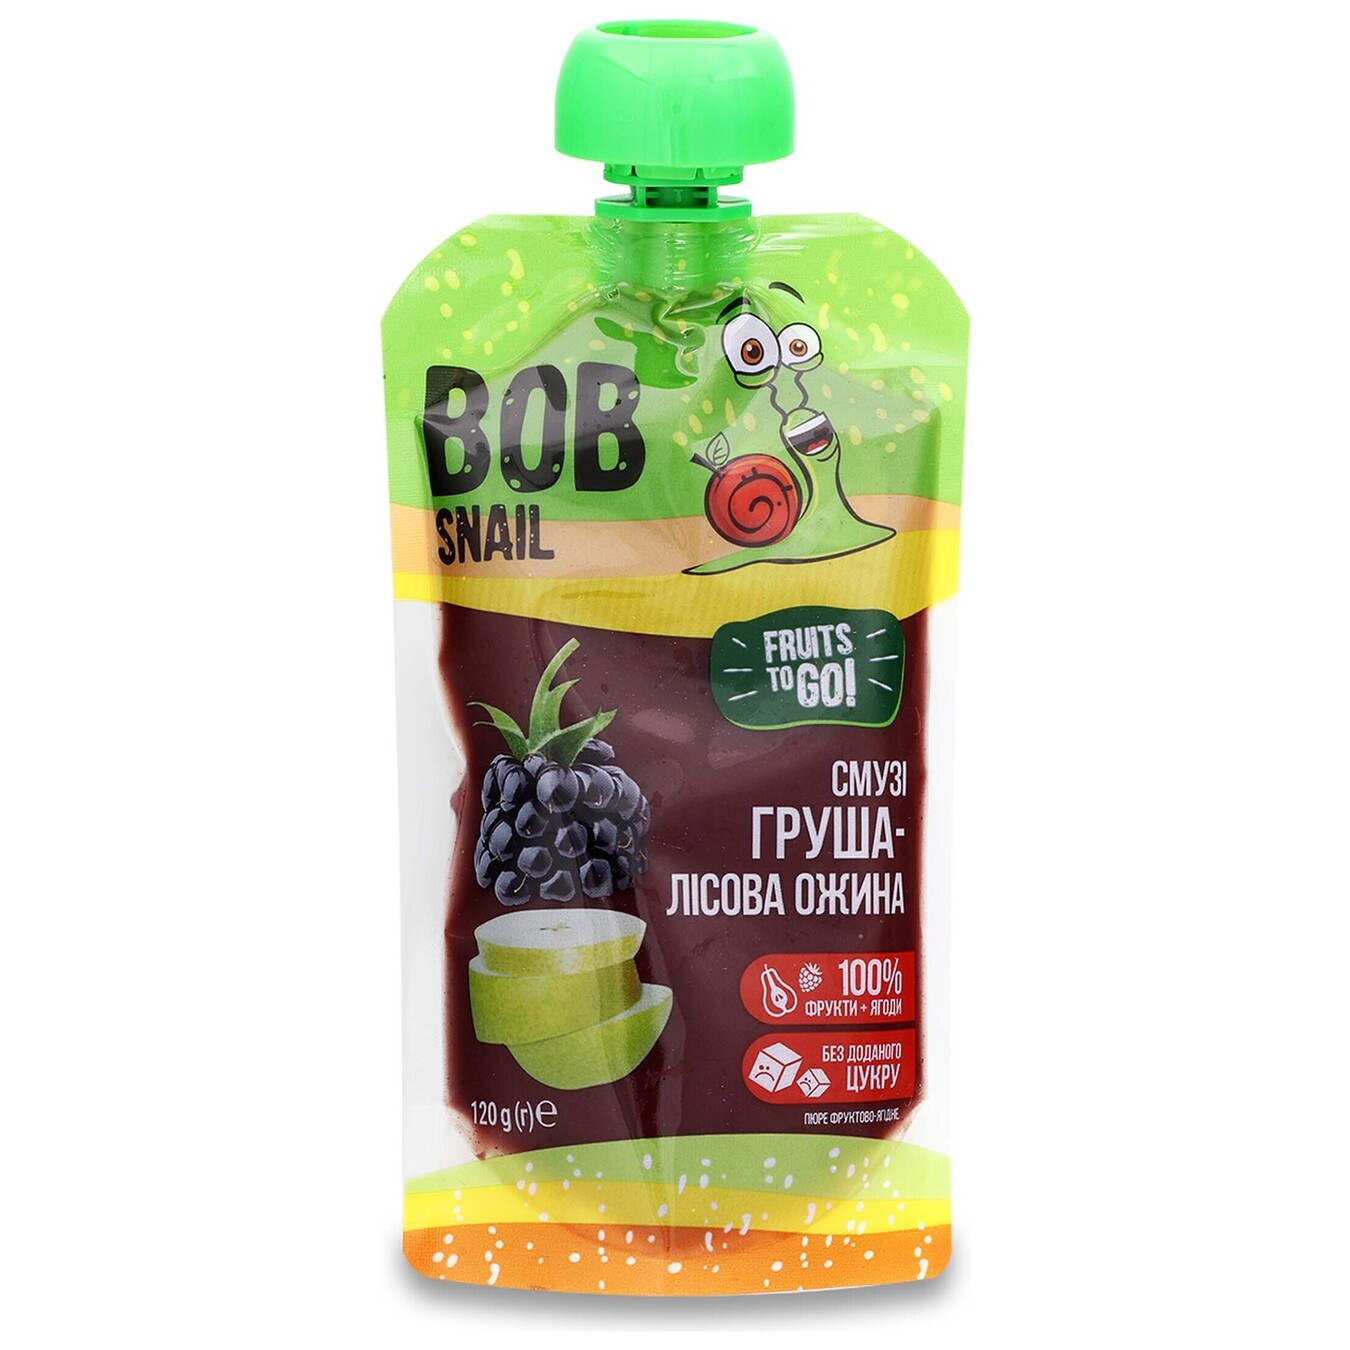 Bob Snail fruit puree Smoothies Pear-Forest Blackberry pasteurized 120 g